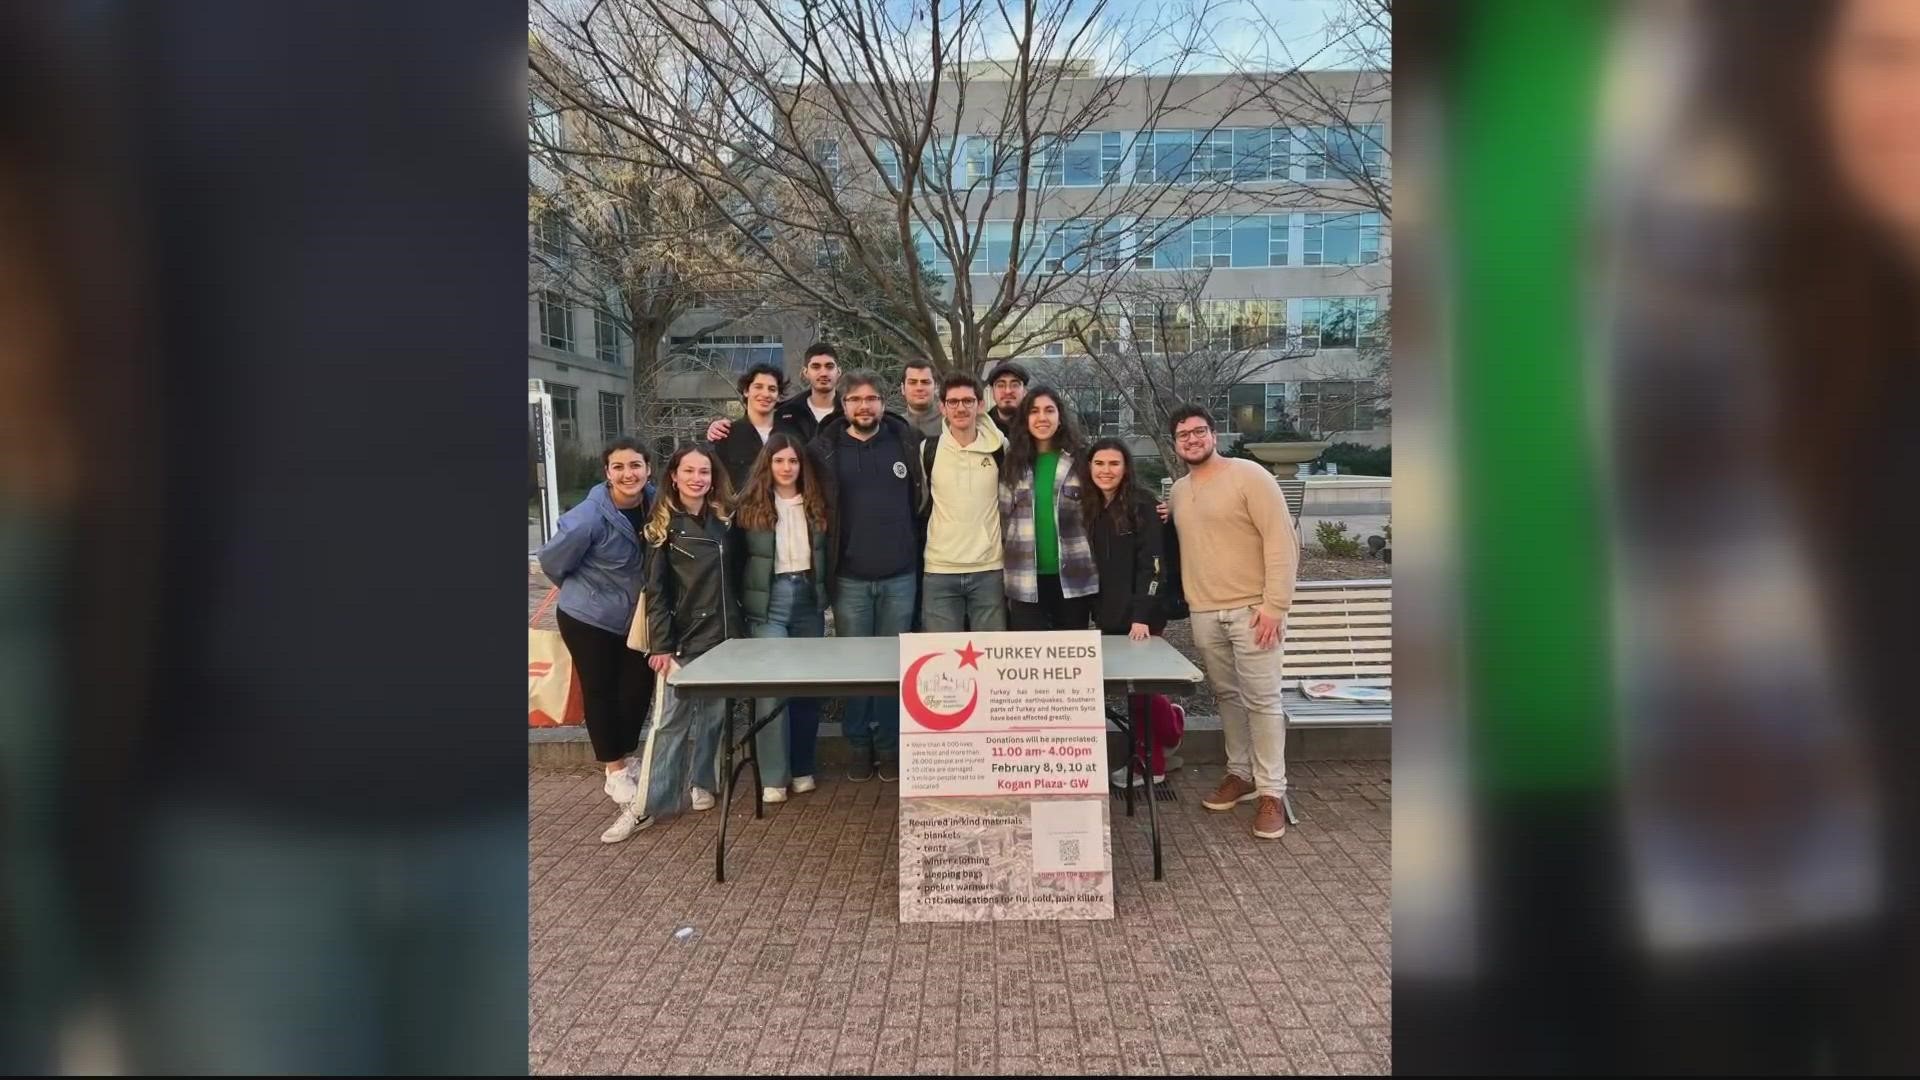 It's been one week since major earthquakes devasted Turkey and Syria. Turkish student groups in D.C. have been collecting supplies to send overseas to help.